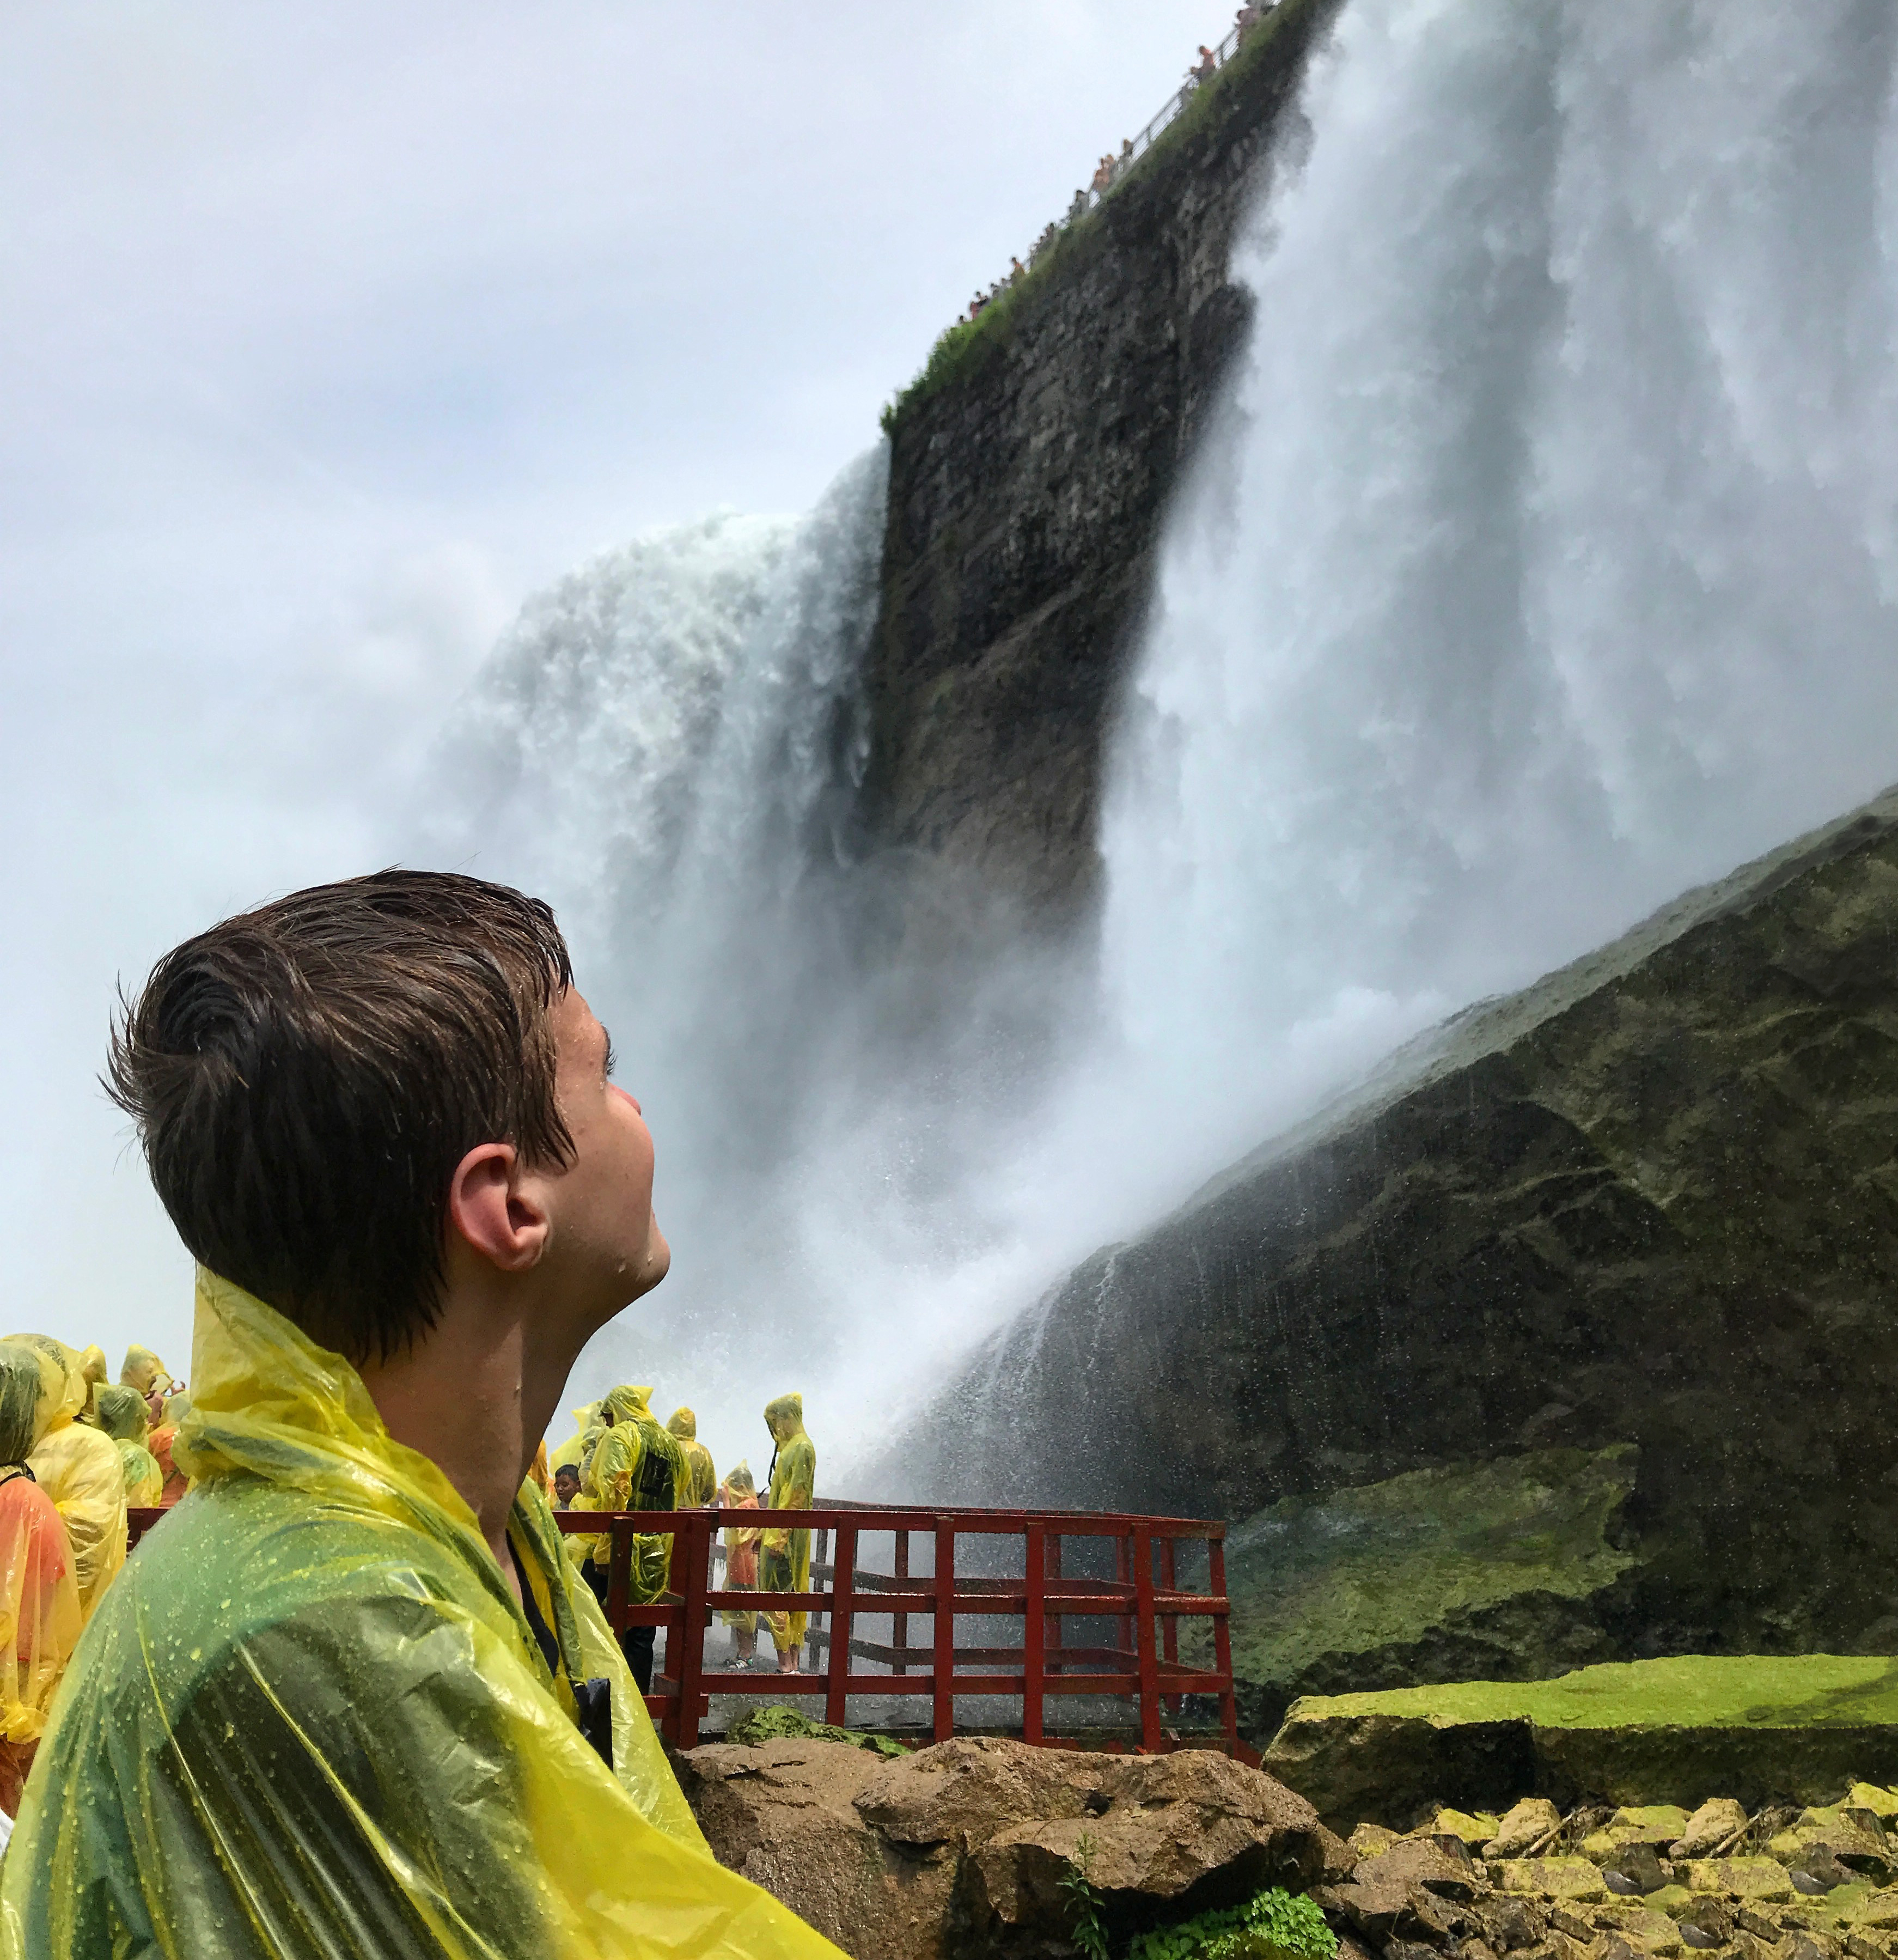 A young man looks up at mammoth waterfalls.